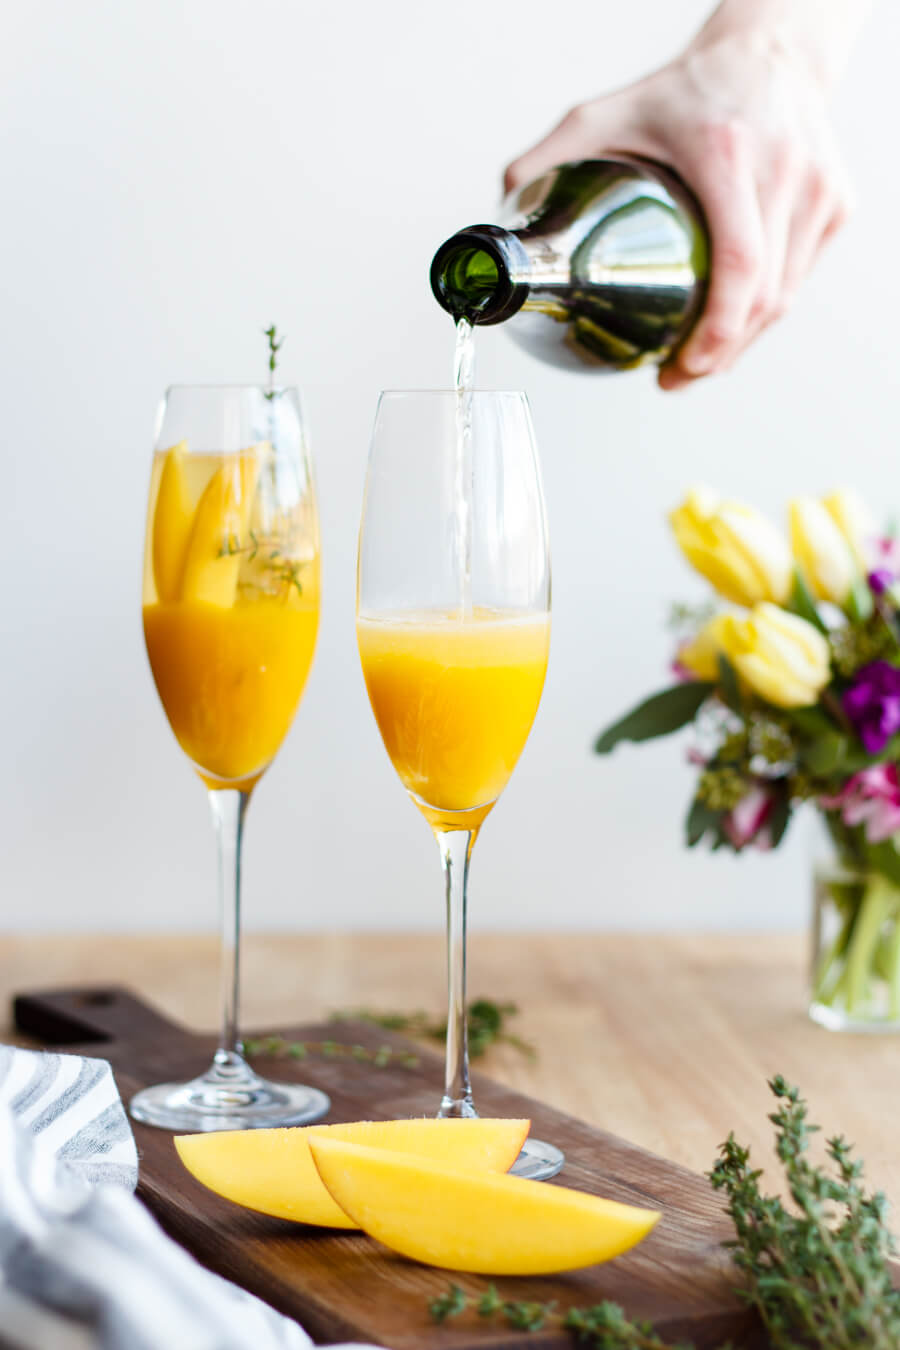 Pop open a bottle of champagne and celebrate the spring season with these mango thyme mimosas that are as beautiful as they are delicious! Recipe at www.designsofanykind.com